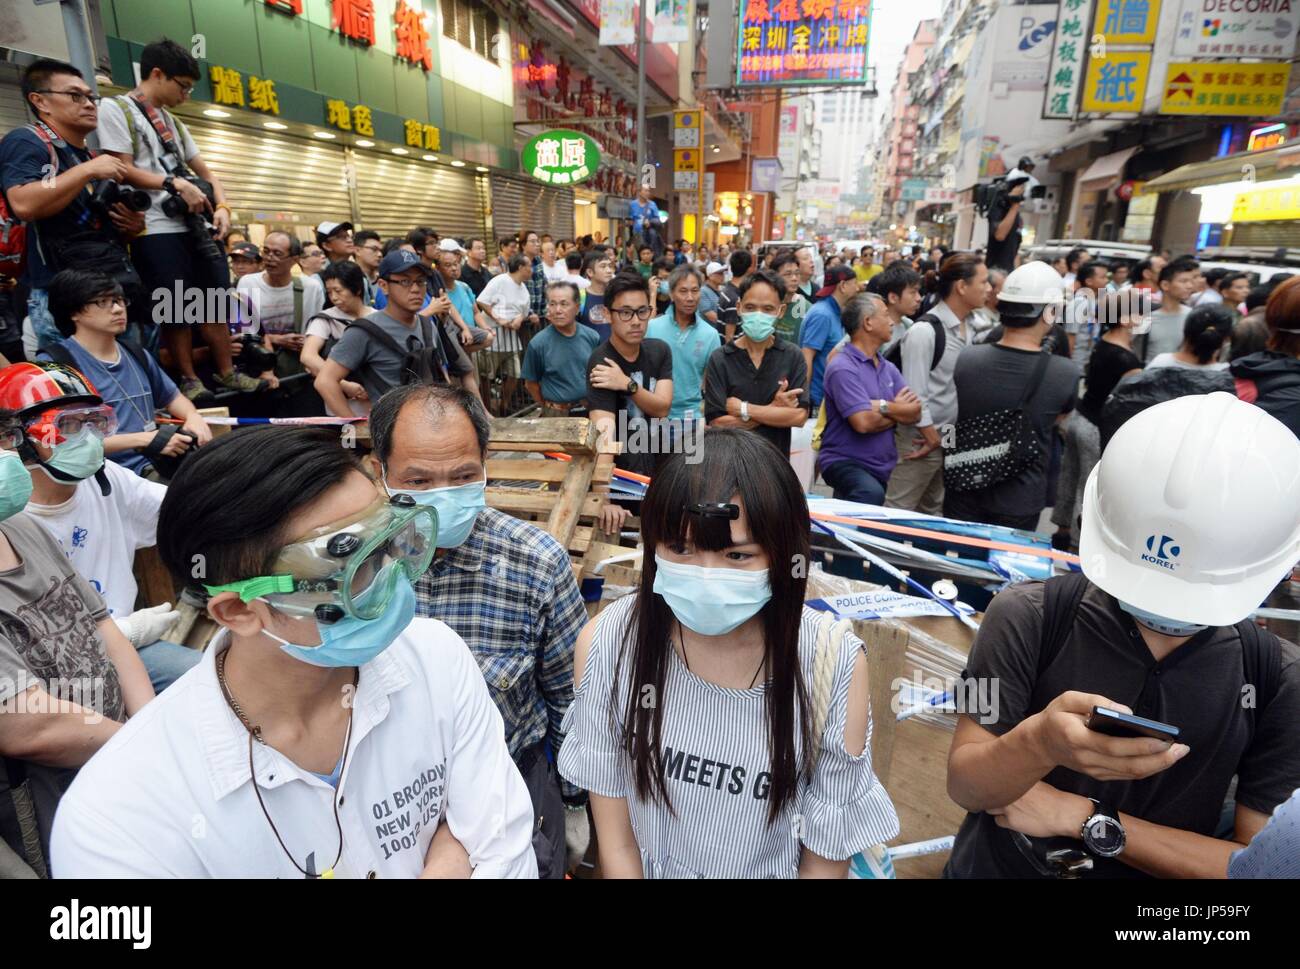 HONG KONG, HONG KONG - Prodemocracy protesters continue an occupation campaign in the busy shopping district of Mongkoki in Hong Kong on Oct. 23, 2014, following fruitless talks with the government and court orders issued for clearance of parts of occupied sites. (Kyodo) Stock Photo